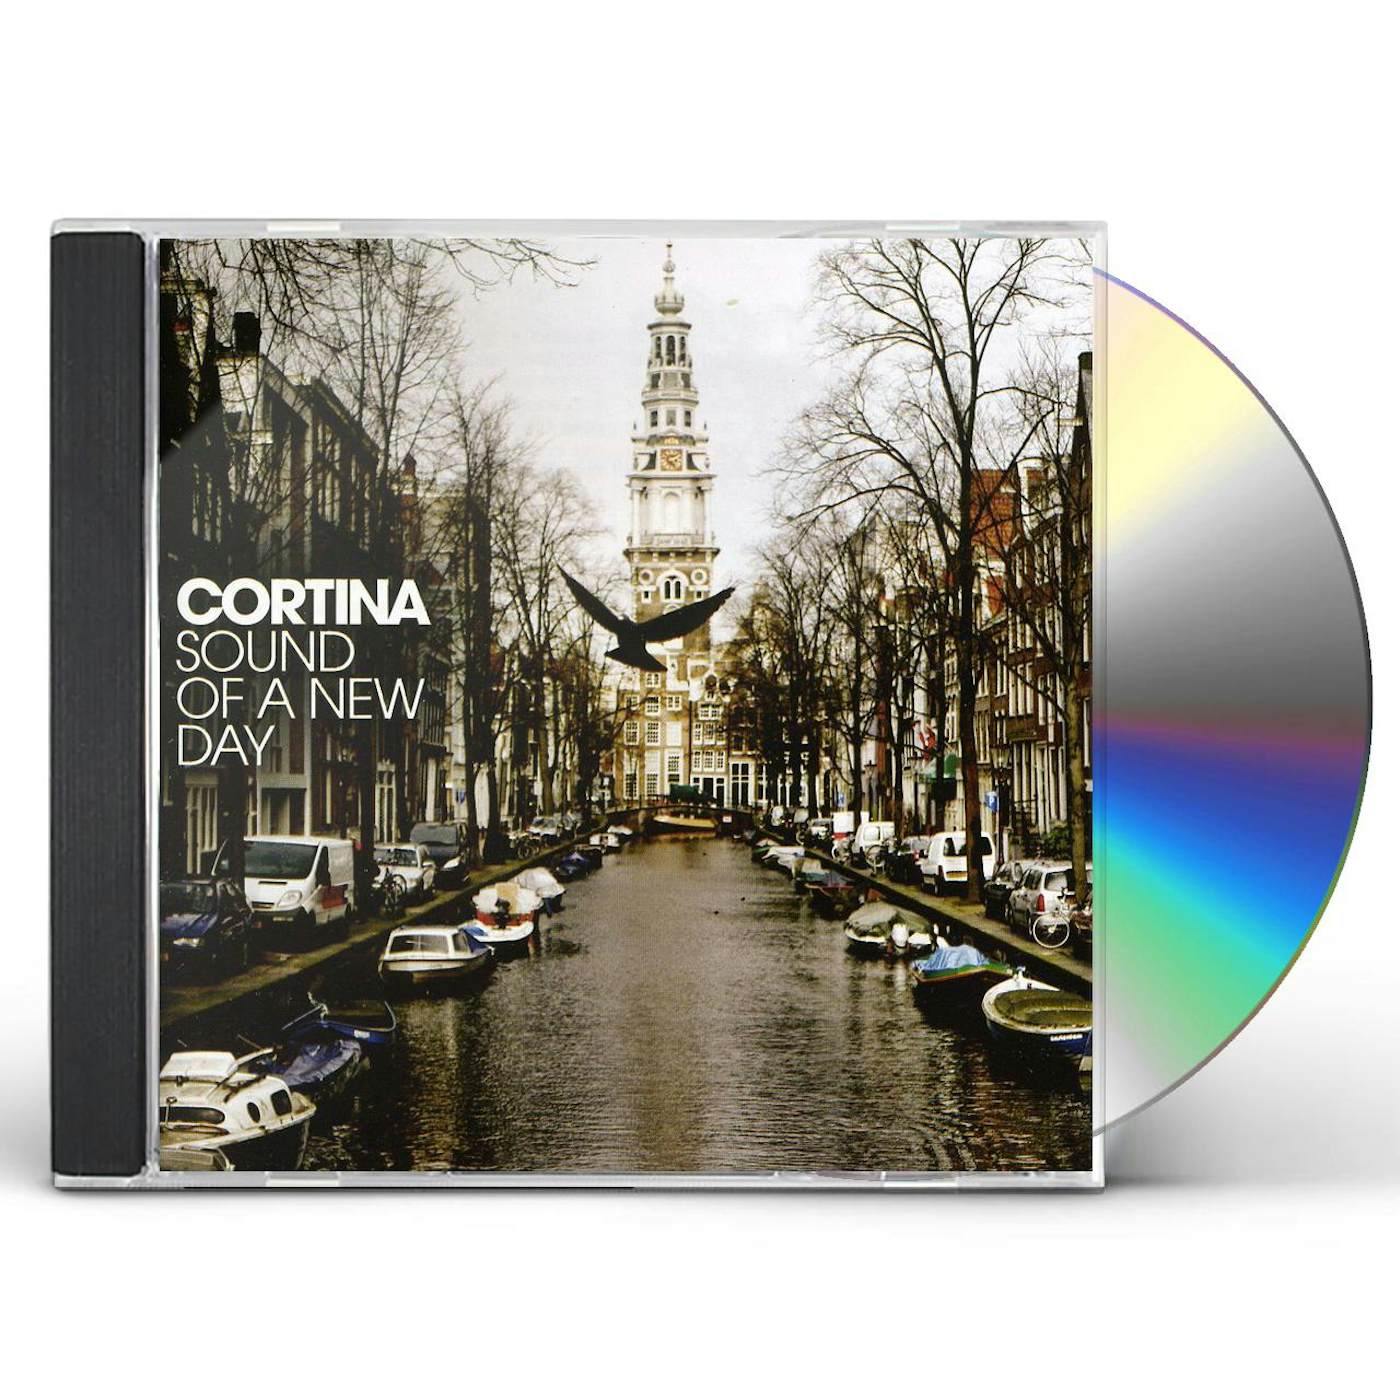 Cortina SOUND OF A NEW DAY CD